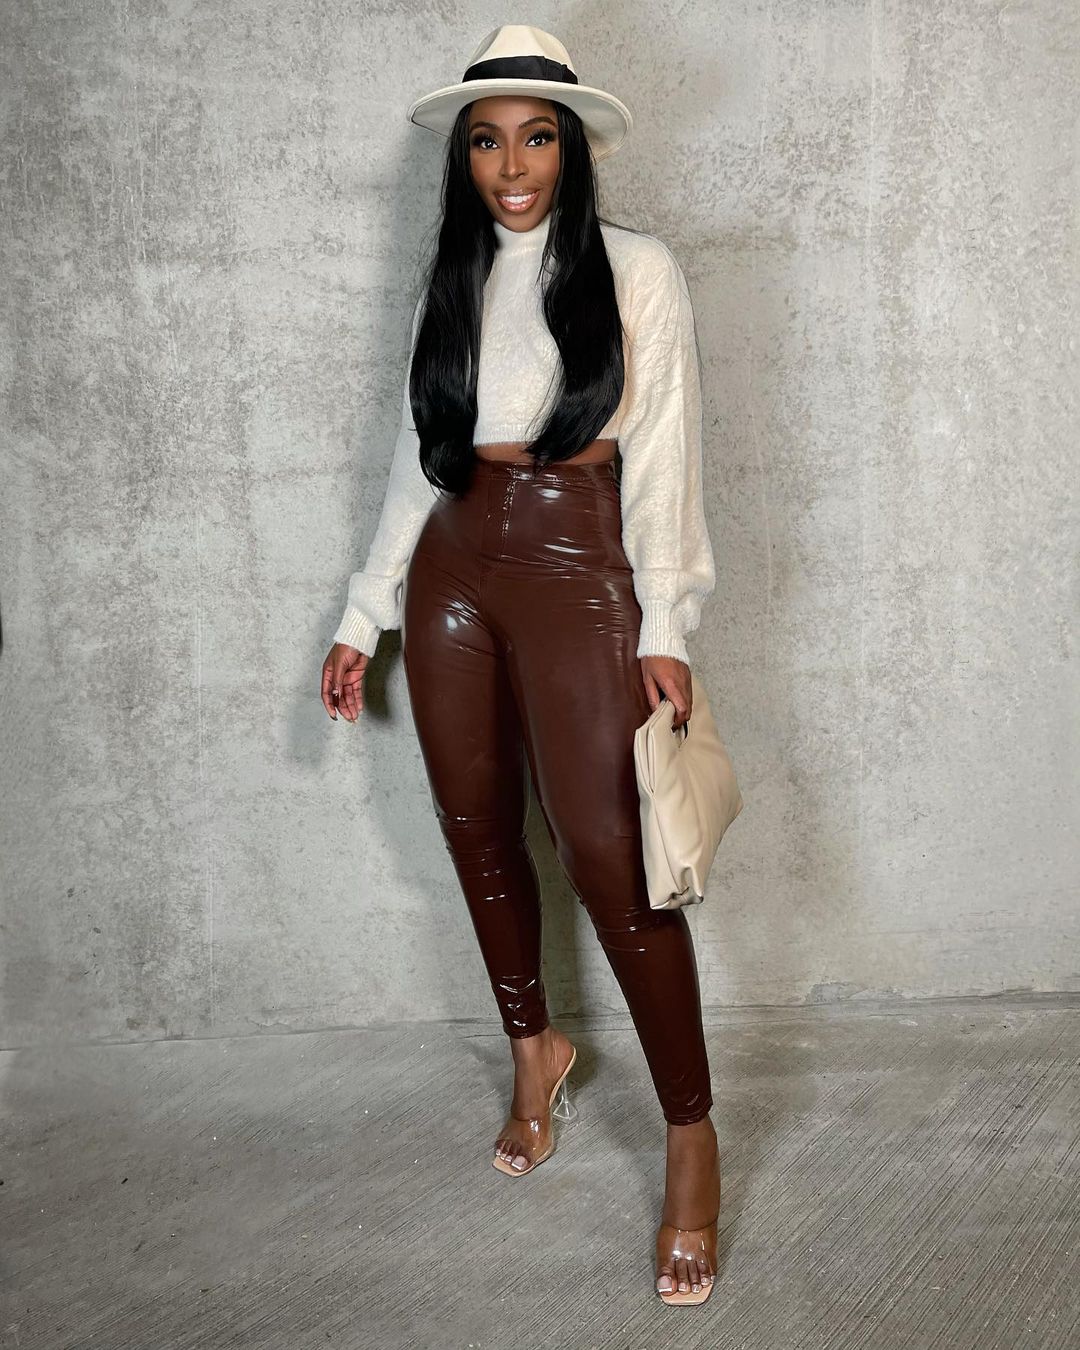 CelebsThatRock 50: 12 Best Leather-Based Outfits Of The Week | ThriveNaija